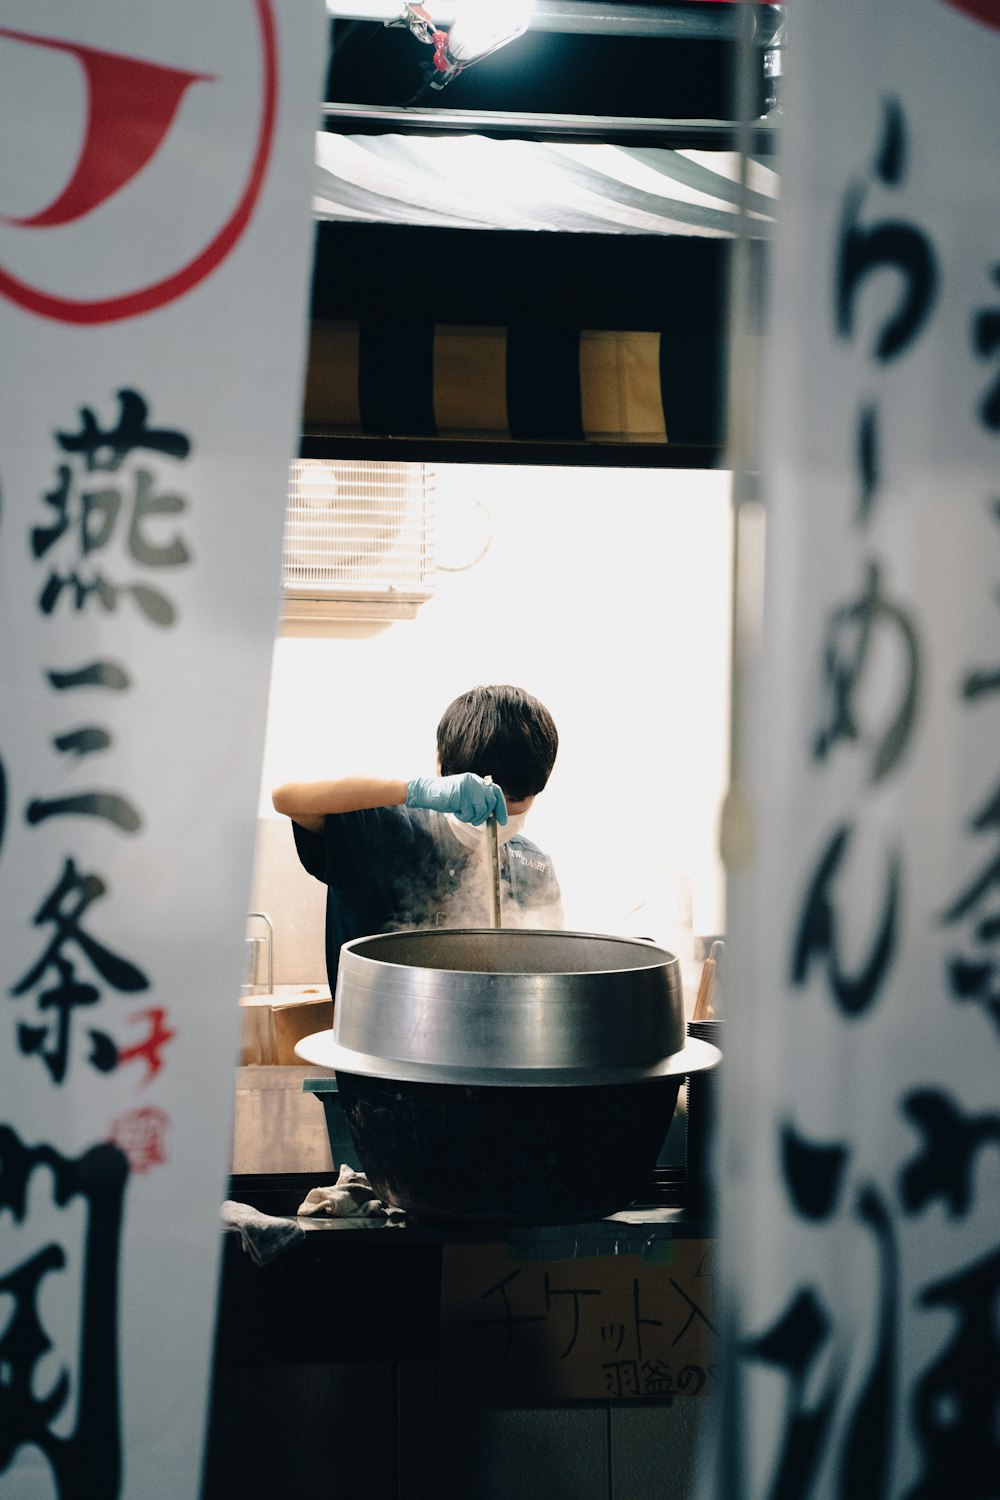 a boy cooking in a kitchen